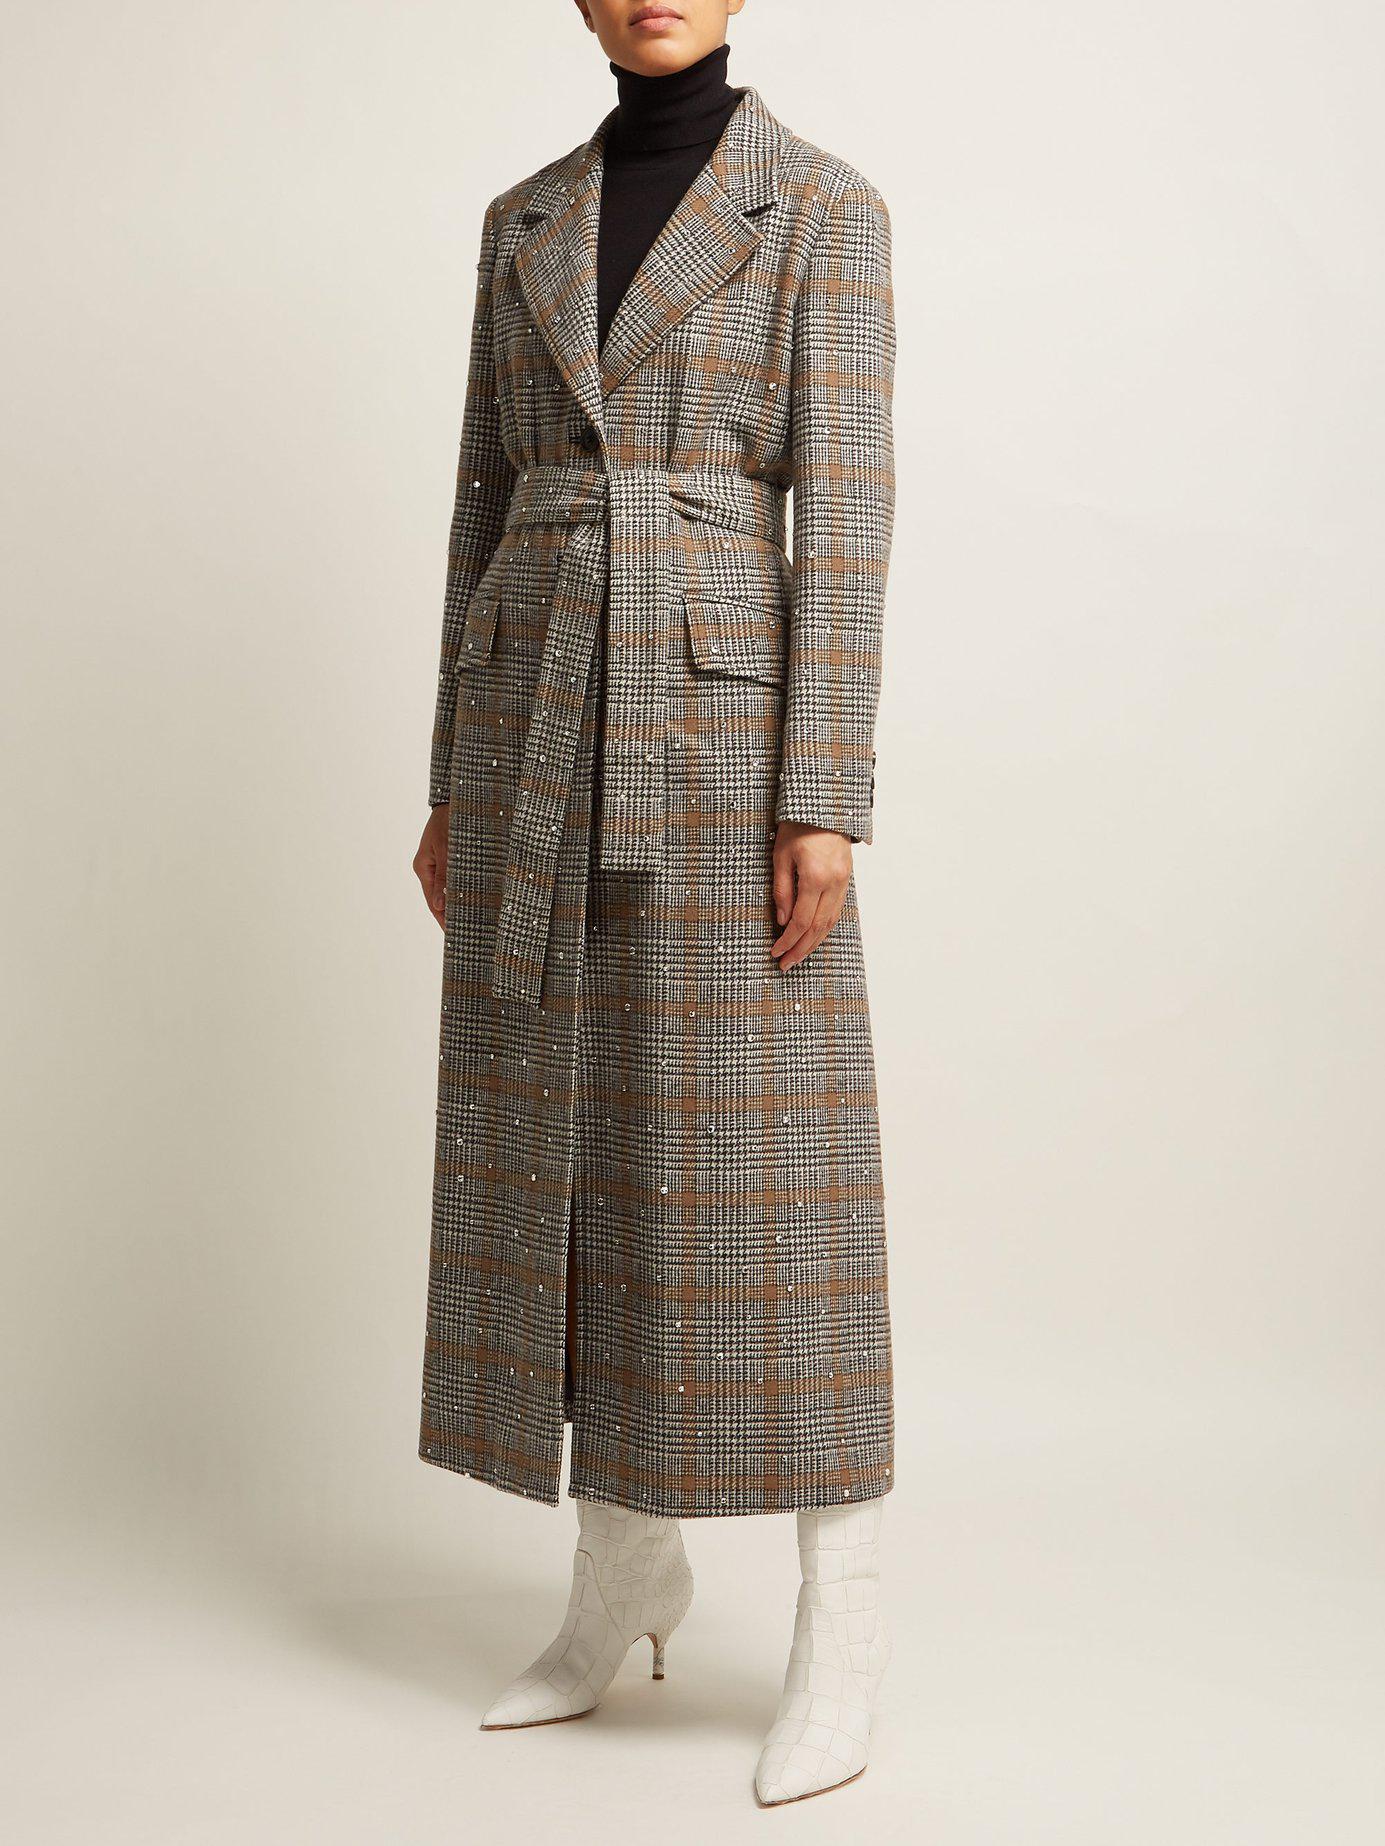 prince of wales check overcoat